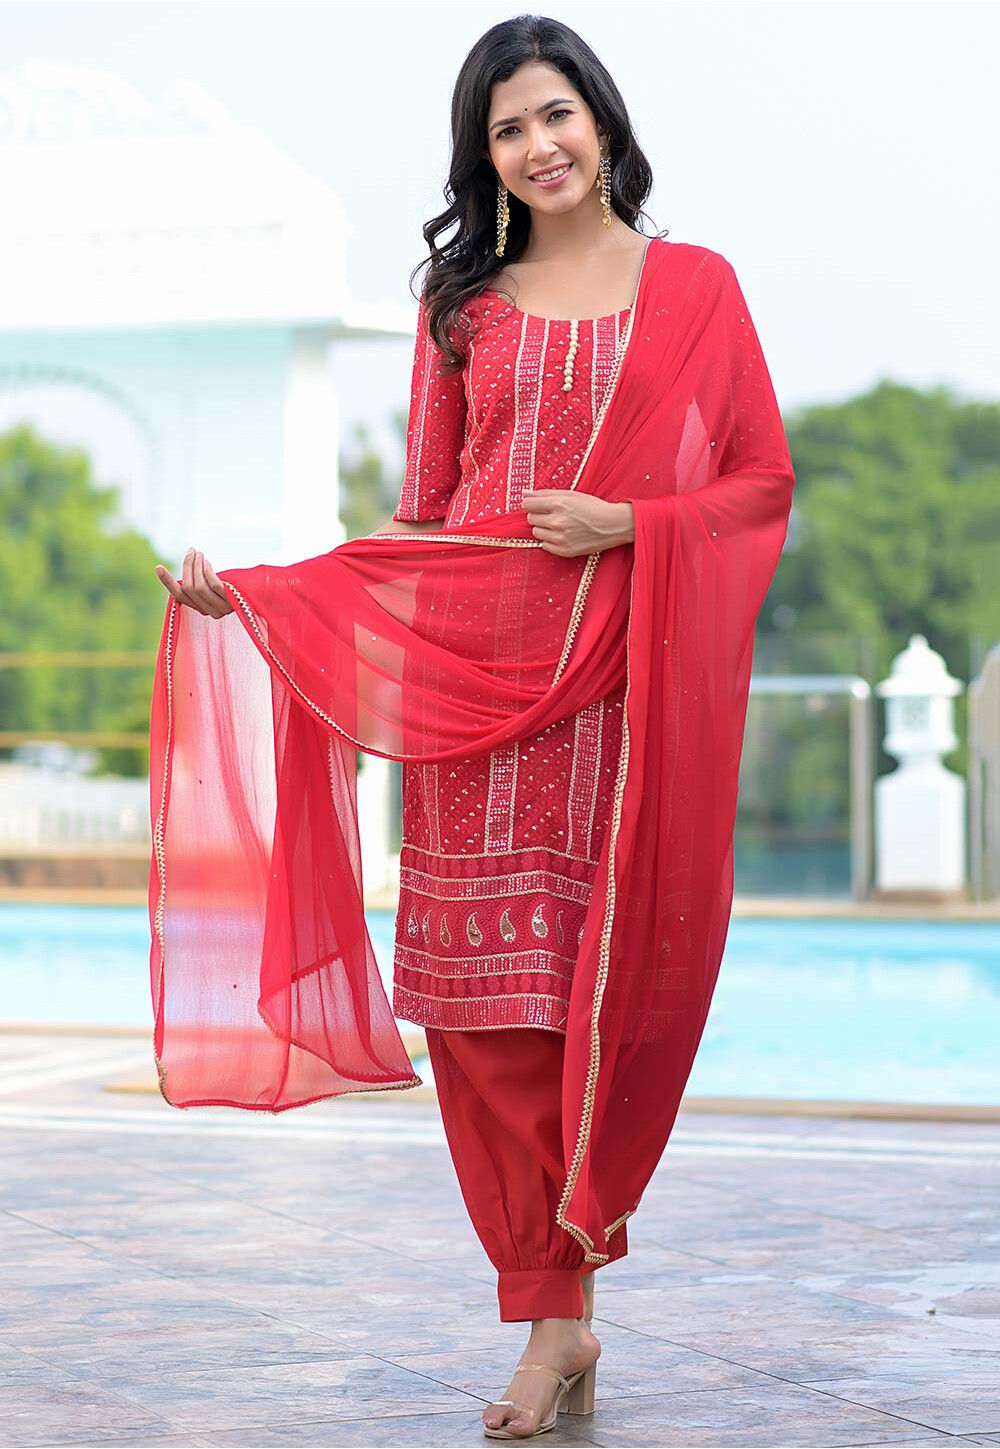 RE - Red Colored Georgette Partwear Salwar Suit - New In - Indian